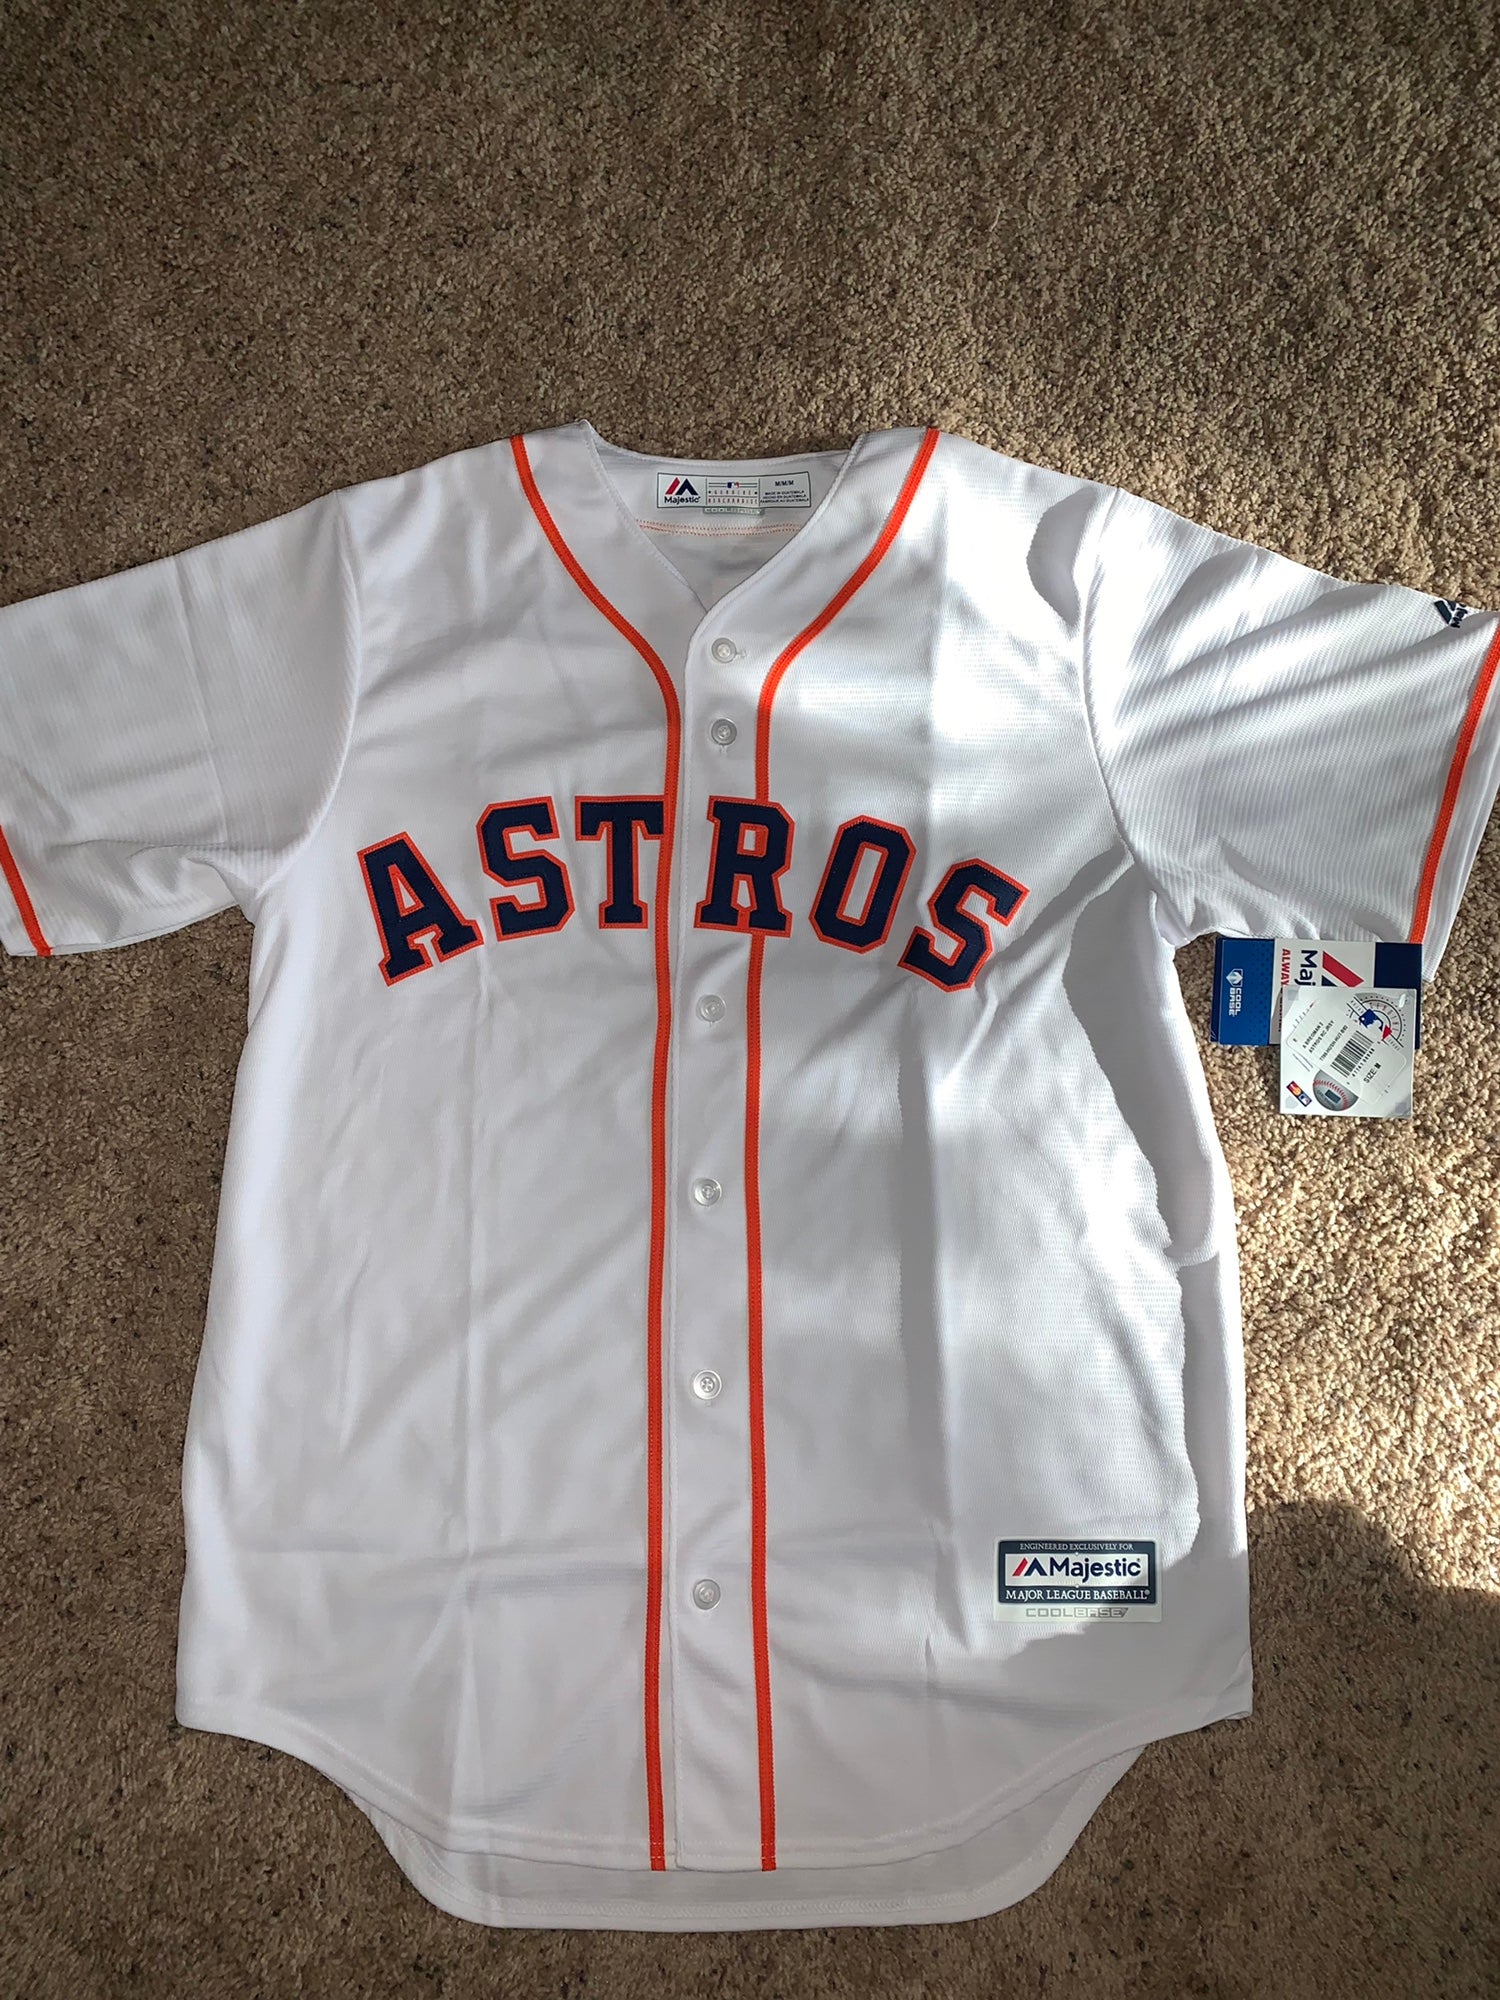 Men's Houston Astros #7 Craig Biggio Retired Navy Blue 2016 Flexbase  Majestic Baseball Jersey on sale,for Cheap,wholesale from China